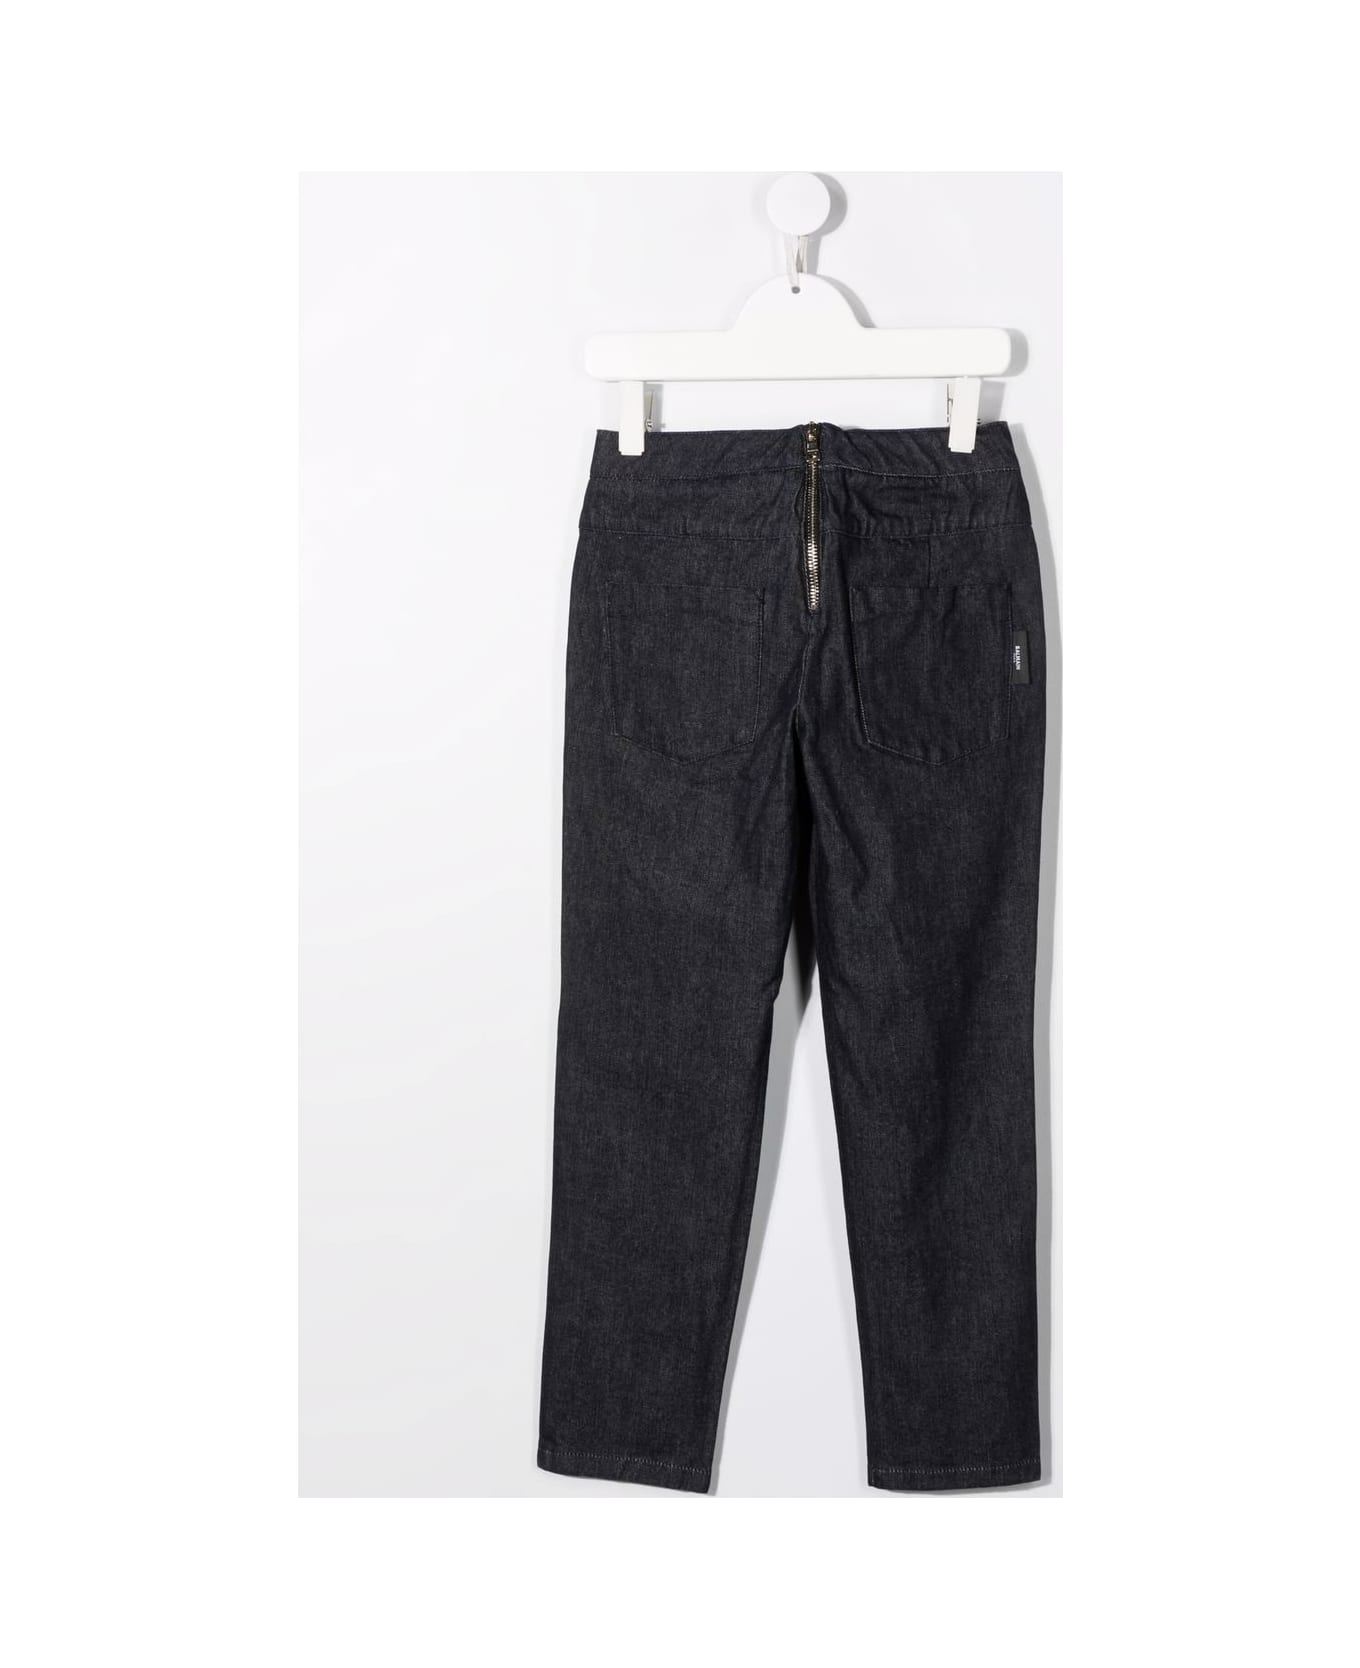 Balmain Navy Blue Kids Tapered Trousers With Golden Embossed Buttons - Blu navy